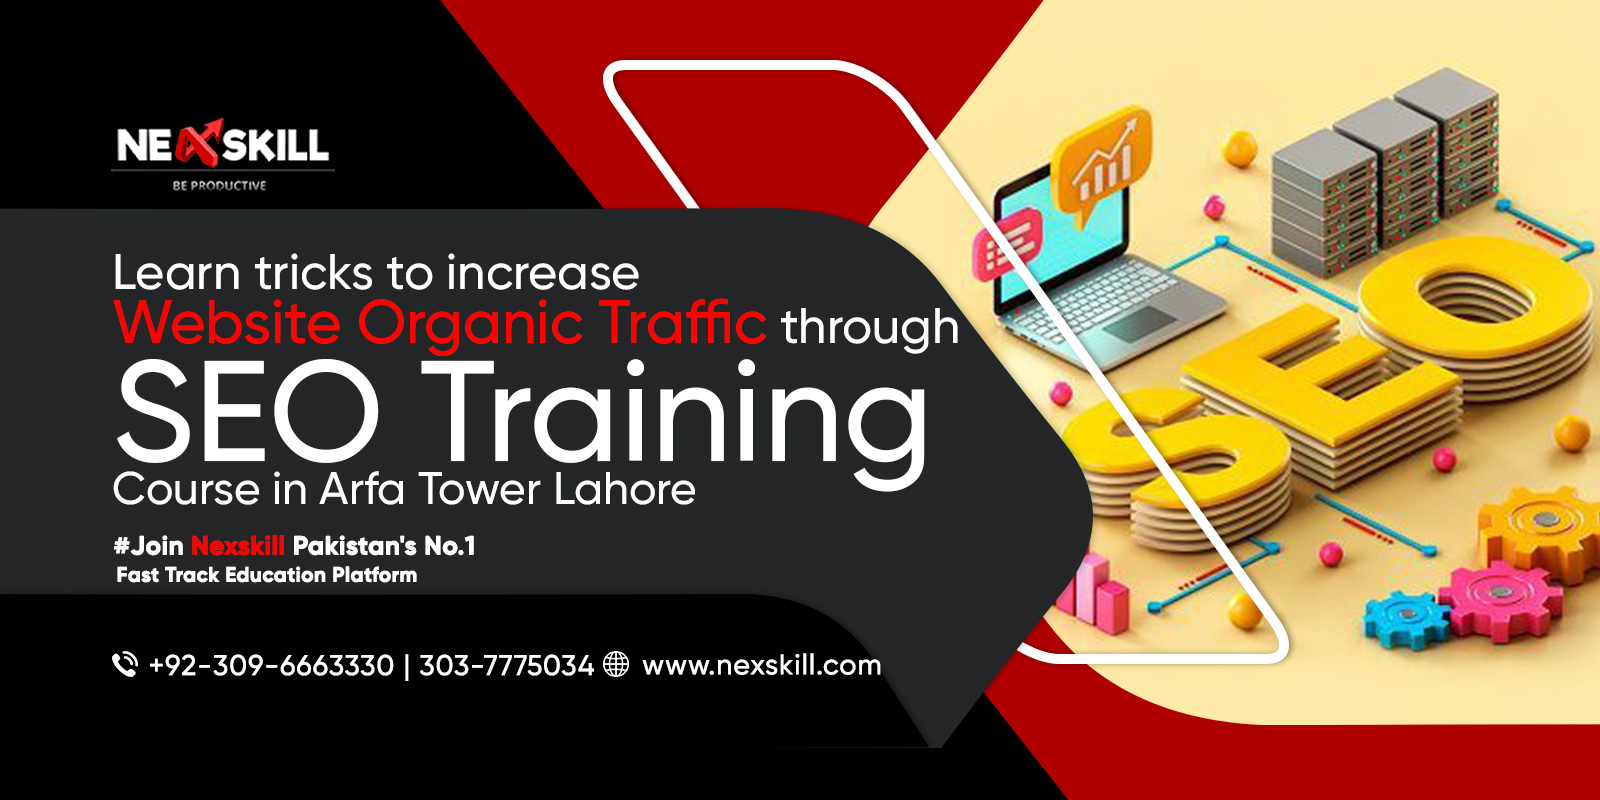 Learn Tricks to Increase Website Organic Traffic through SEO Training Course in Arfa Tower Lahore